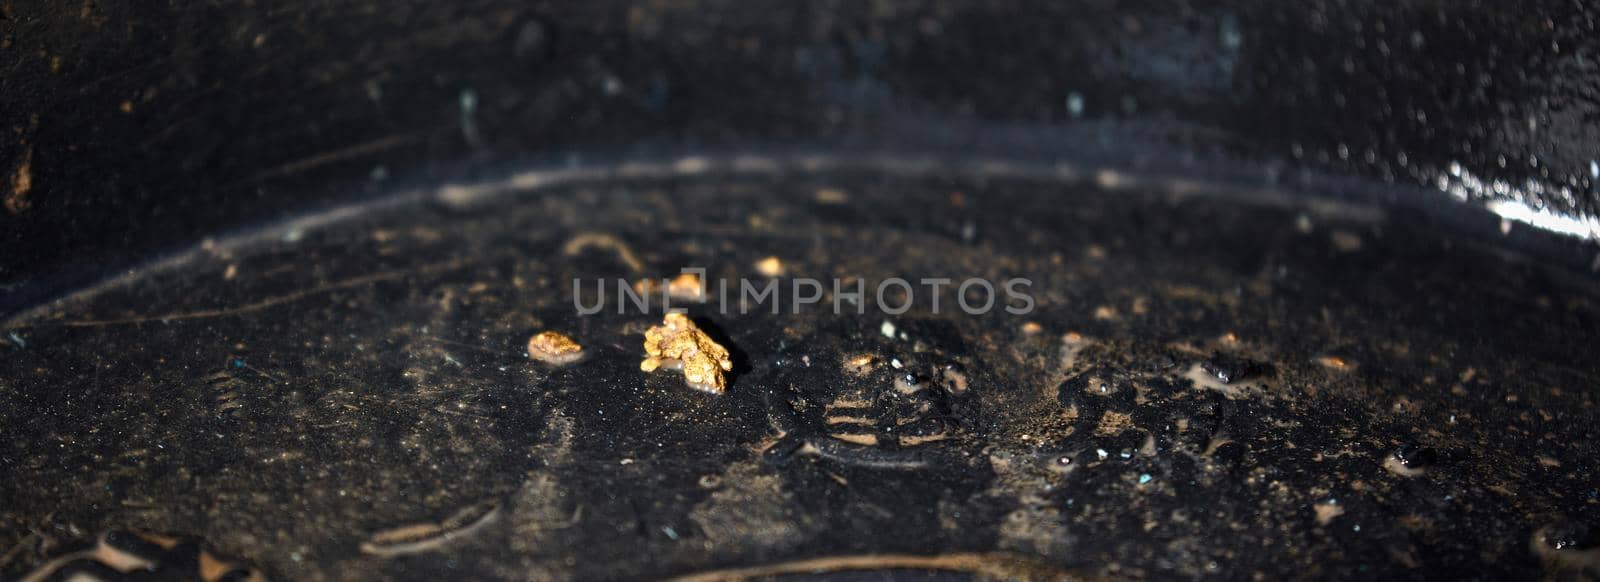 Gold nugget in a gold miner's tray. Gold mining with your own hands.